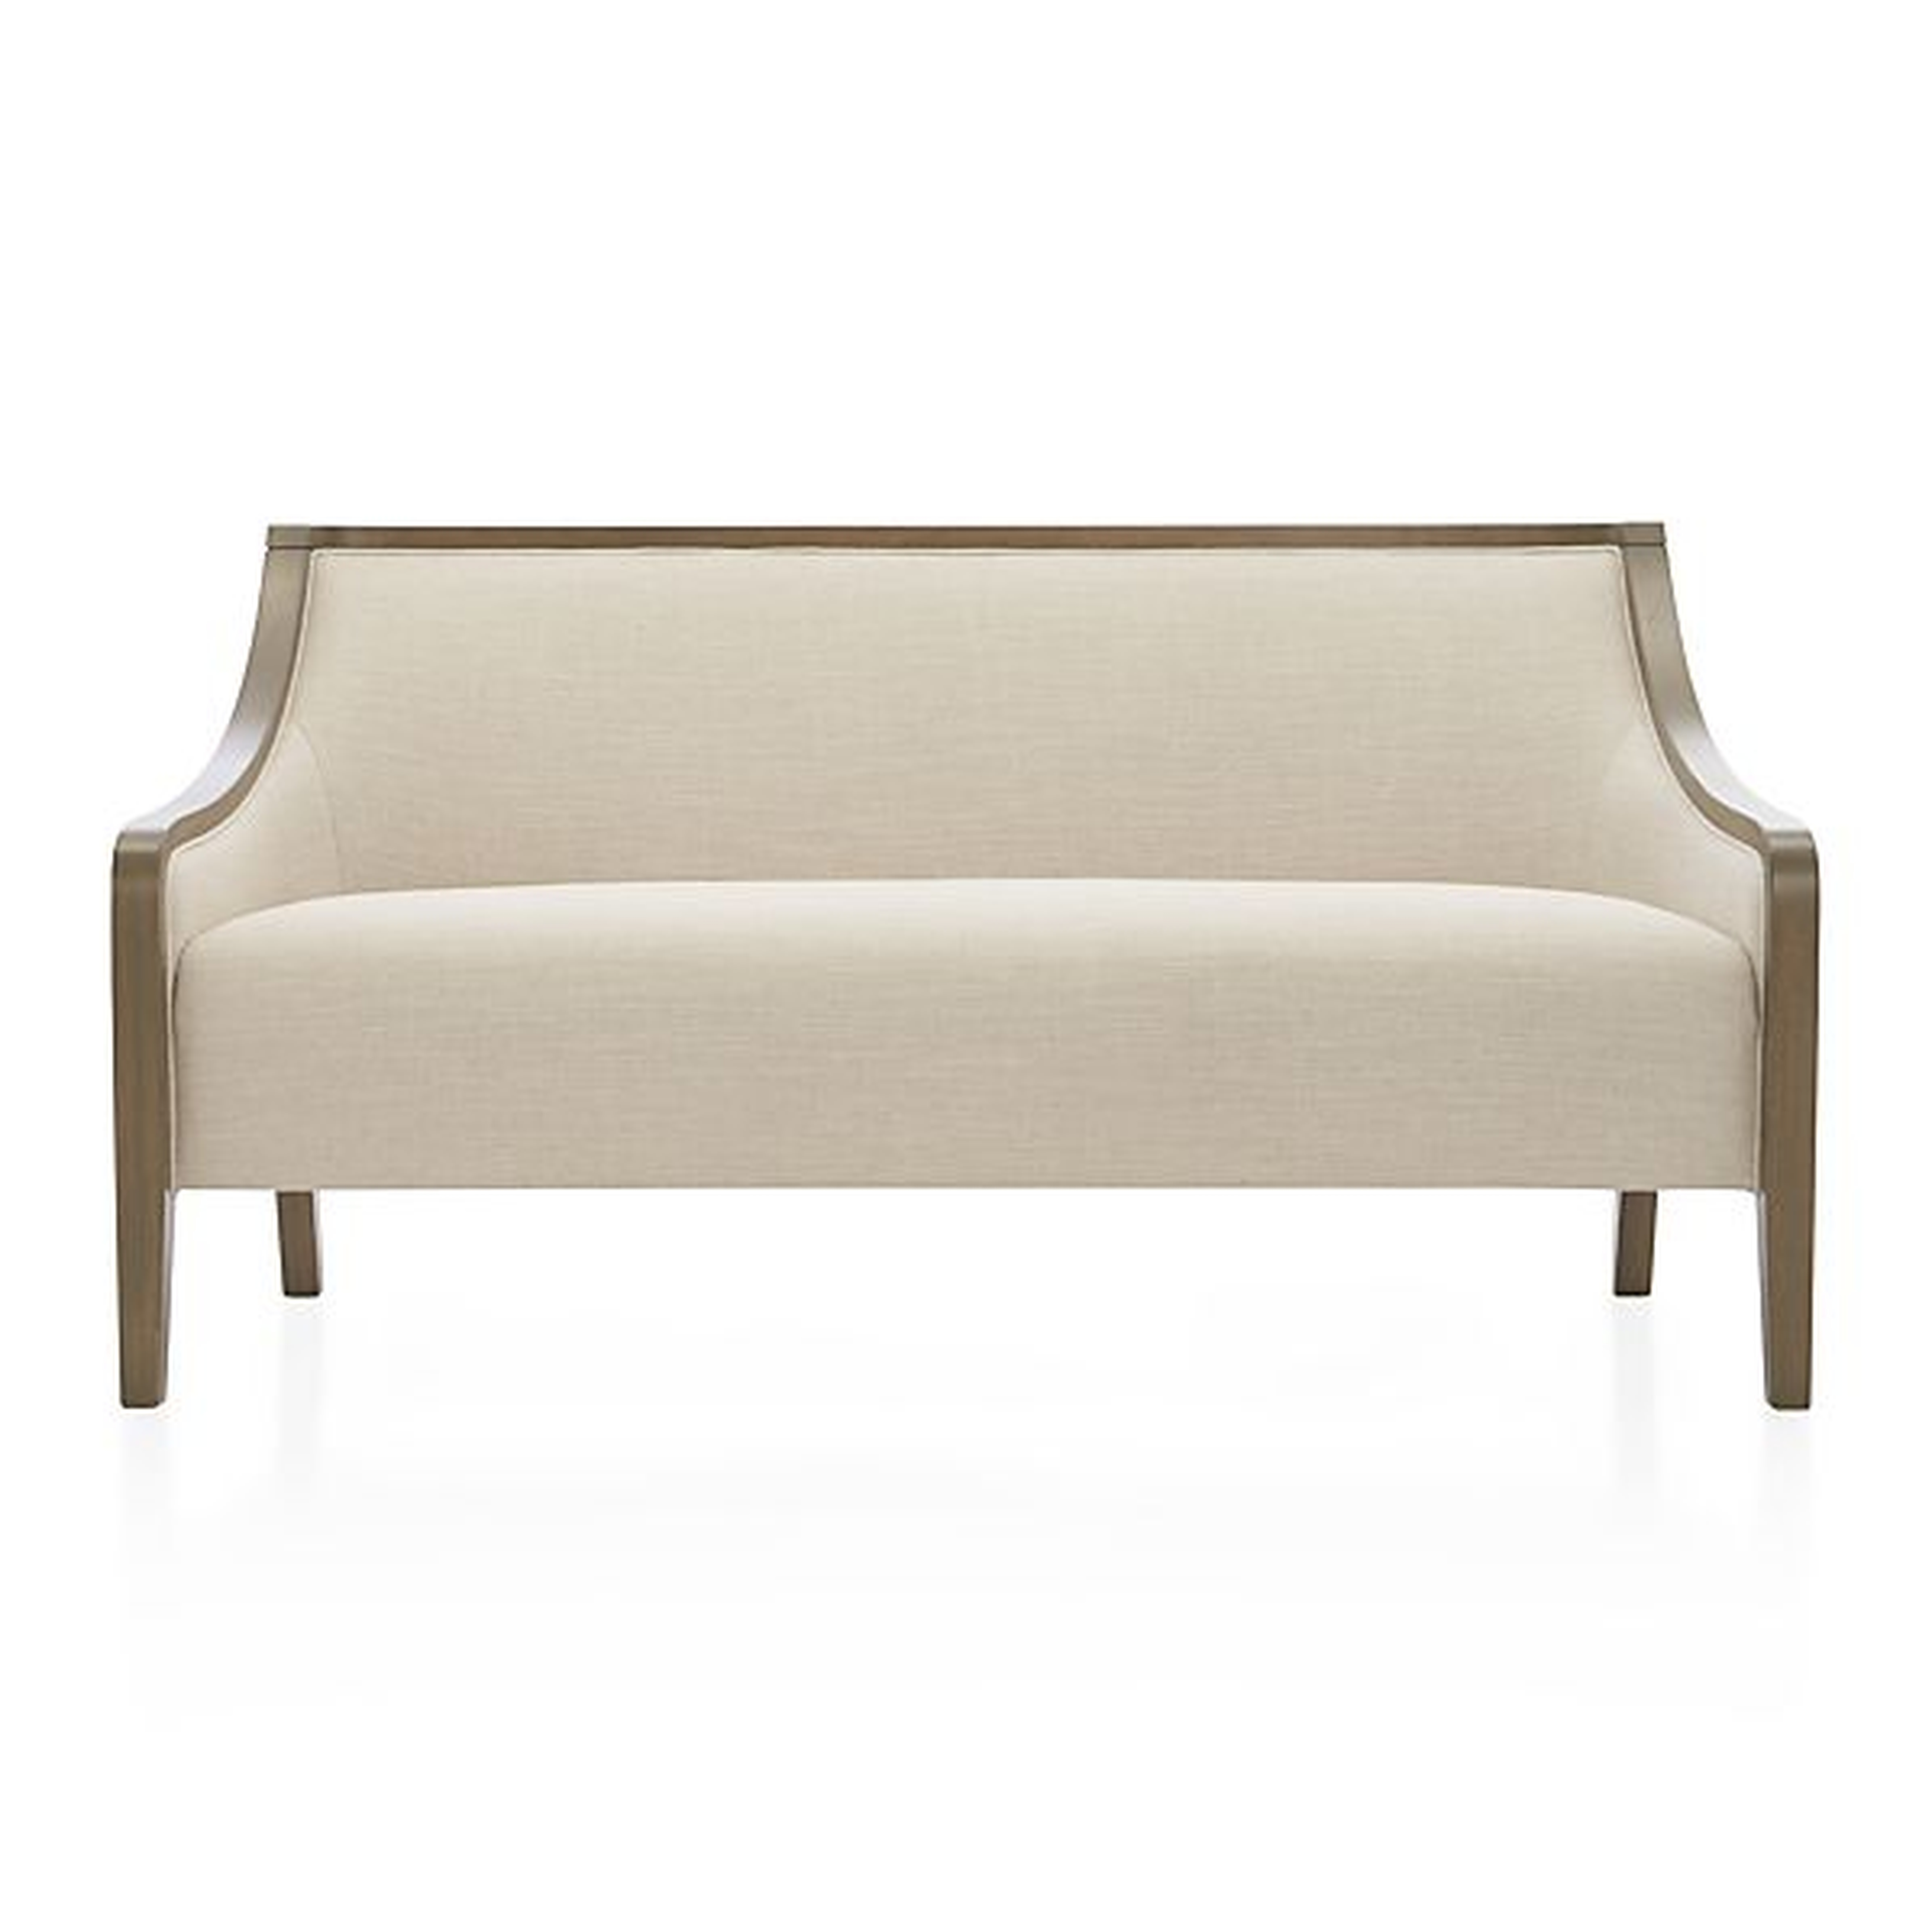 Bryn Settee - Linen - Crate and Barrel